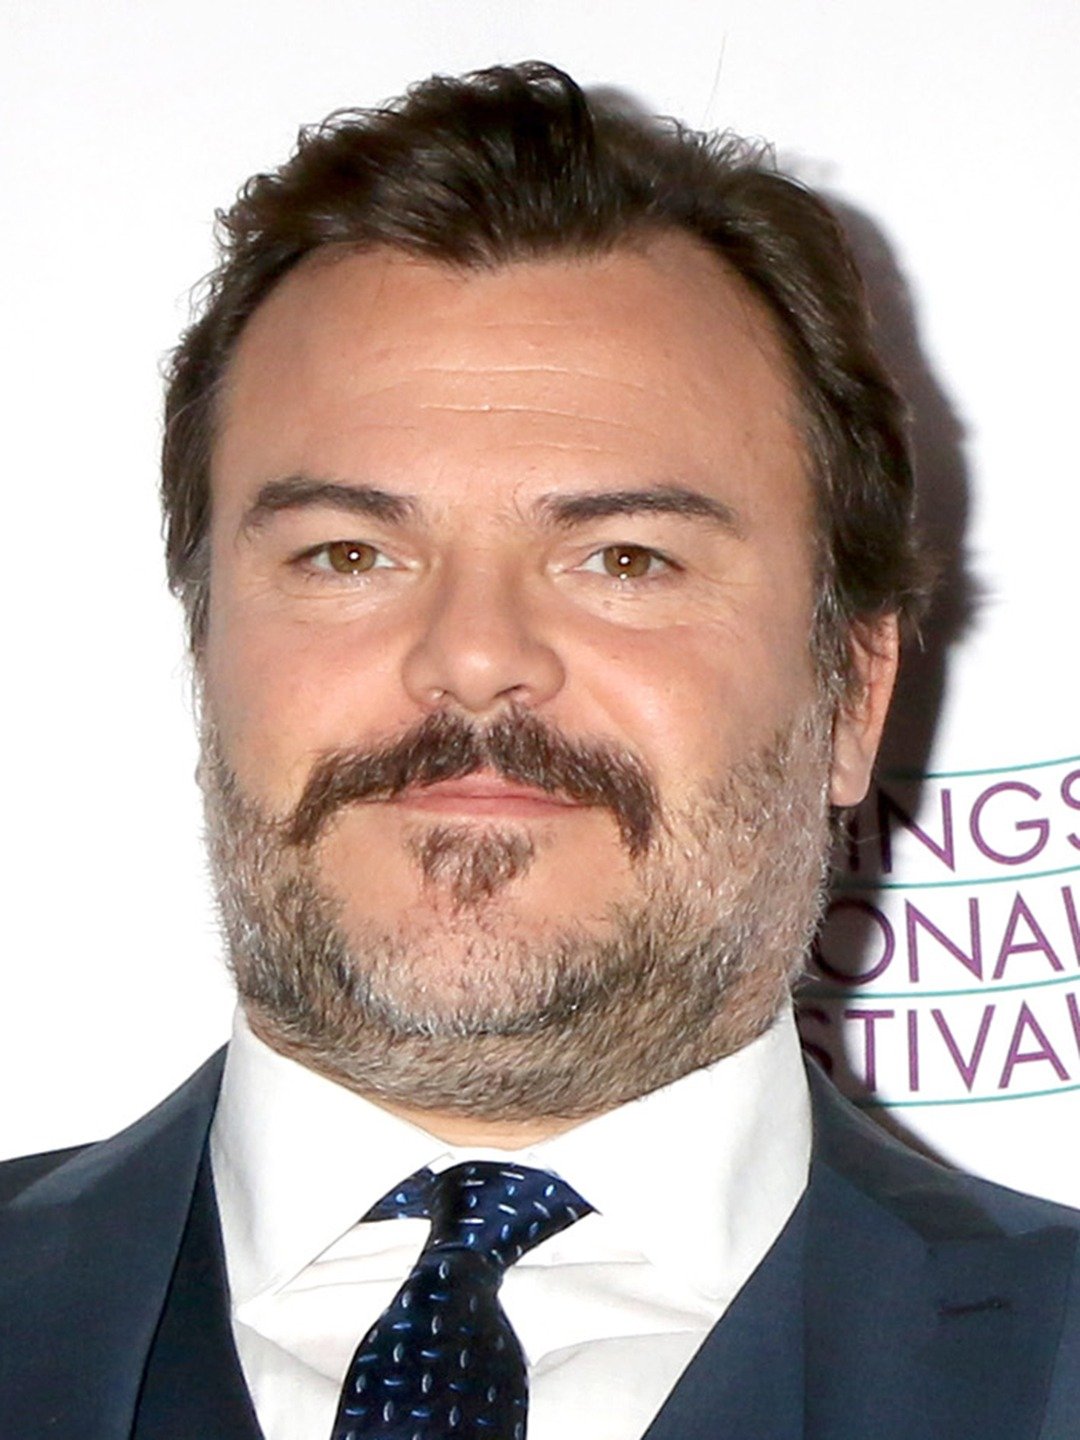 How tall is Jack Black?